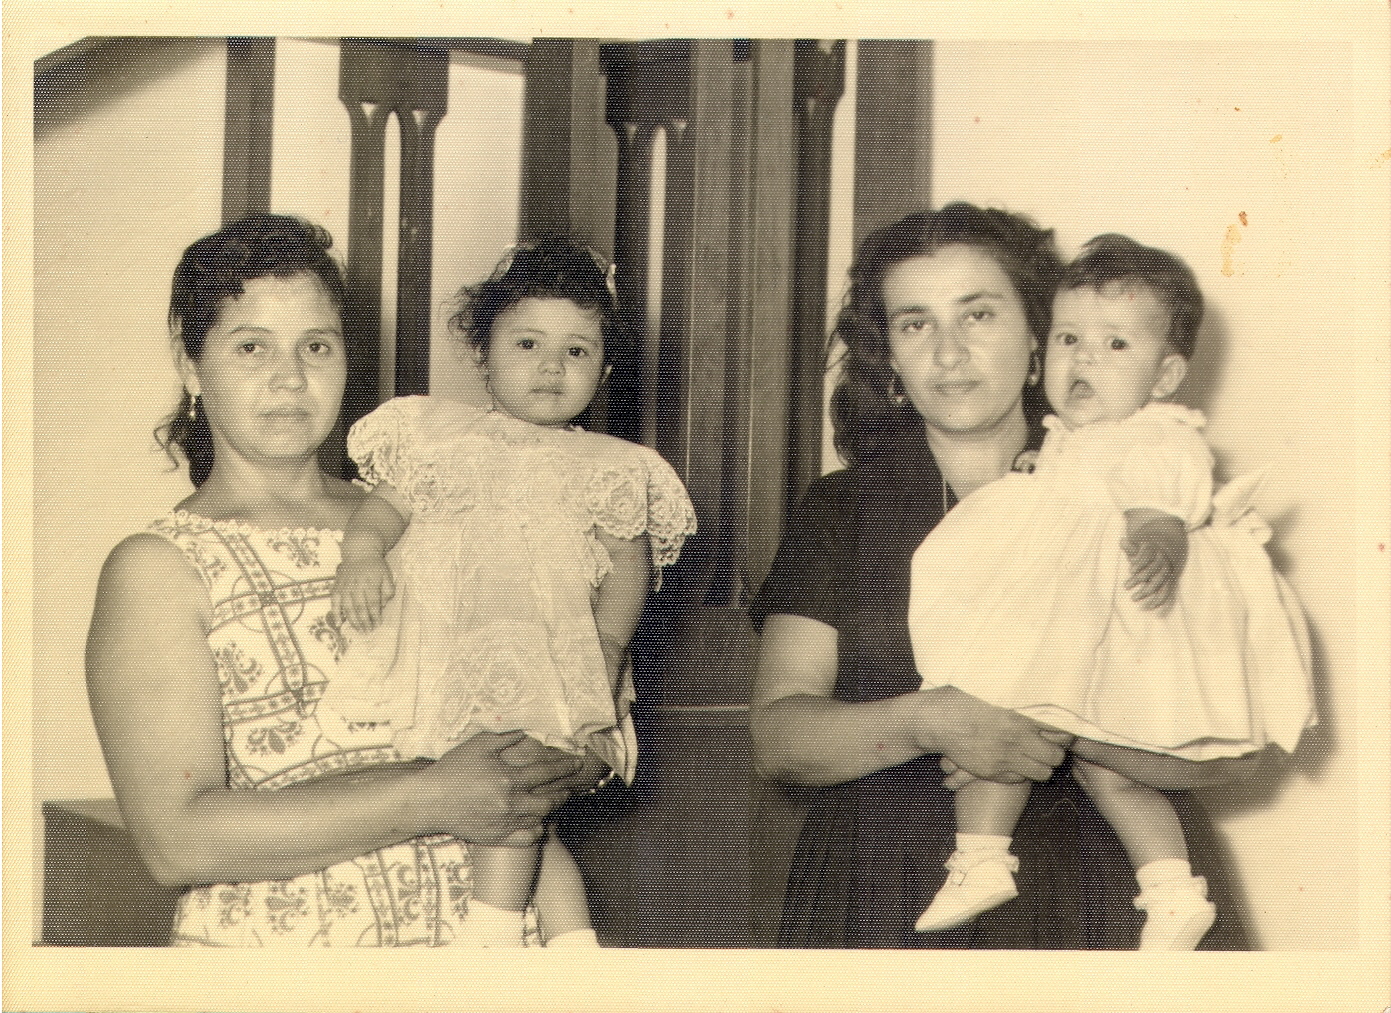 Maragret (left age 33) holding daughter Laura (age 1), with sister- in law (rigth)holding cousin. 